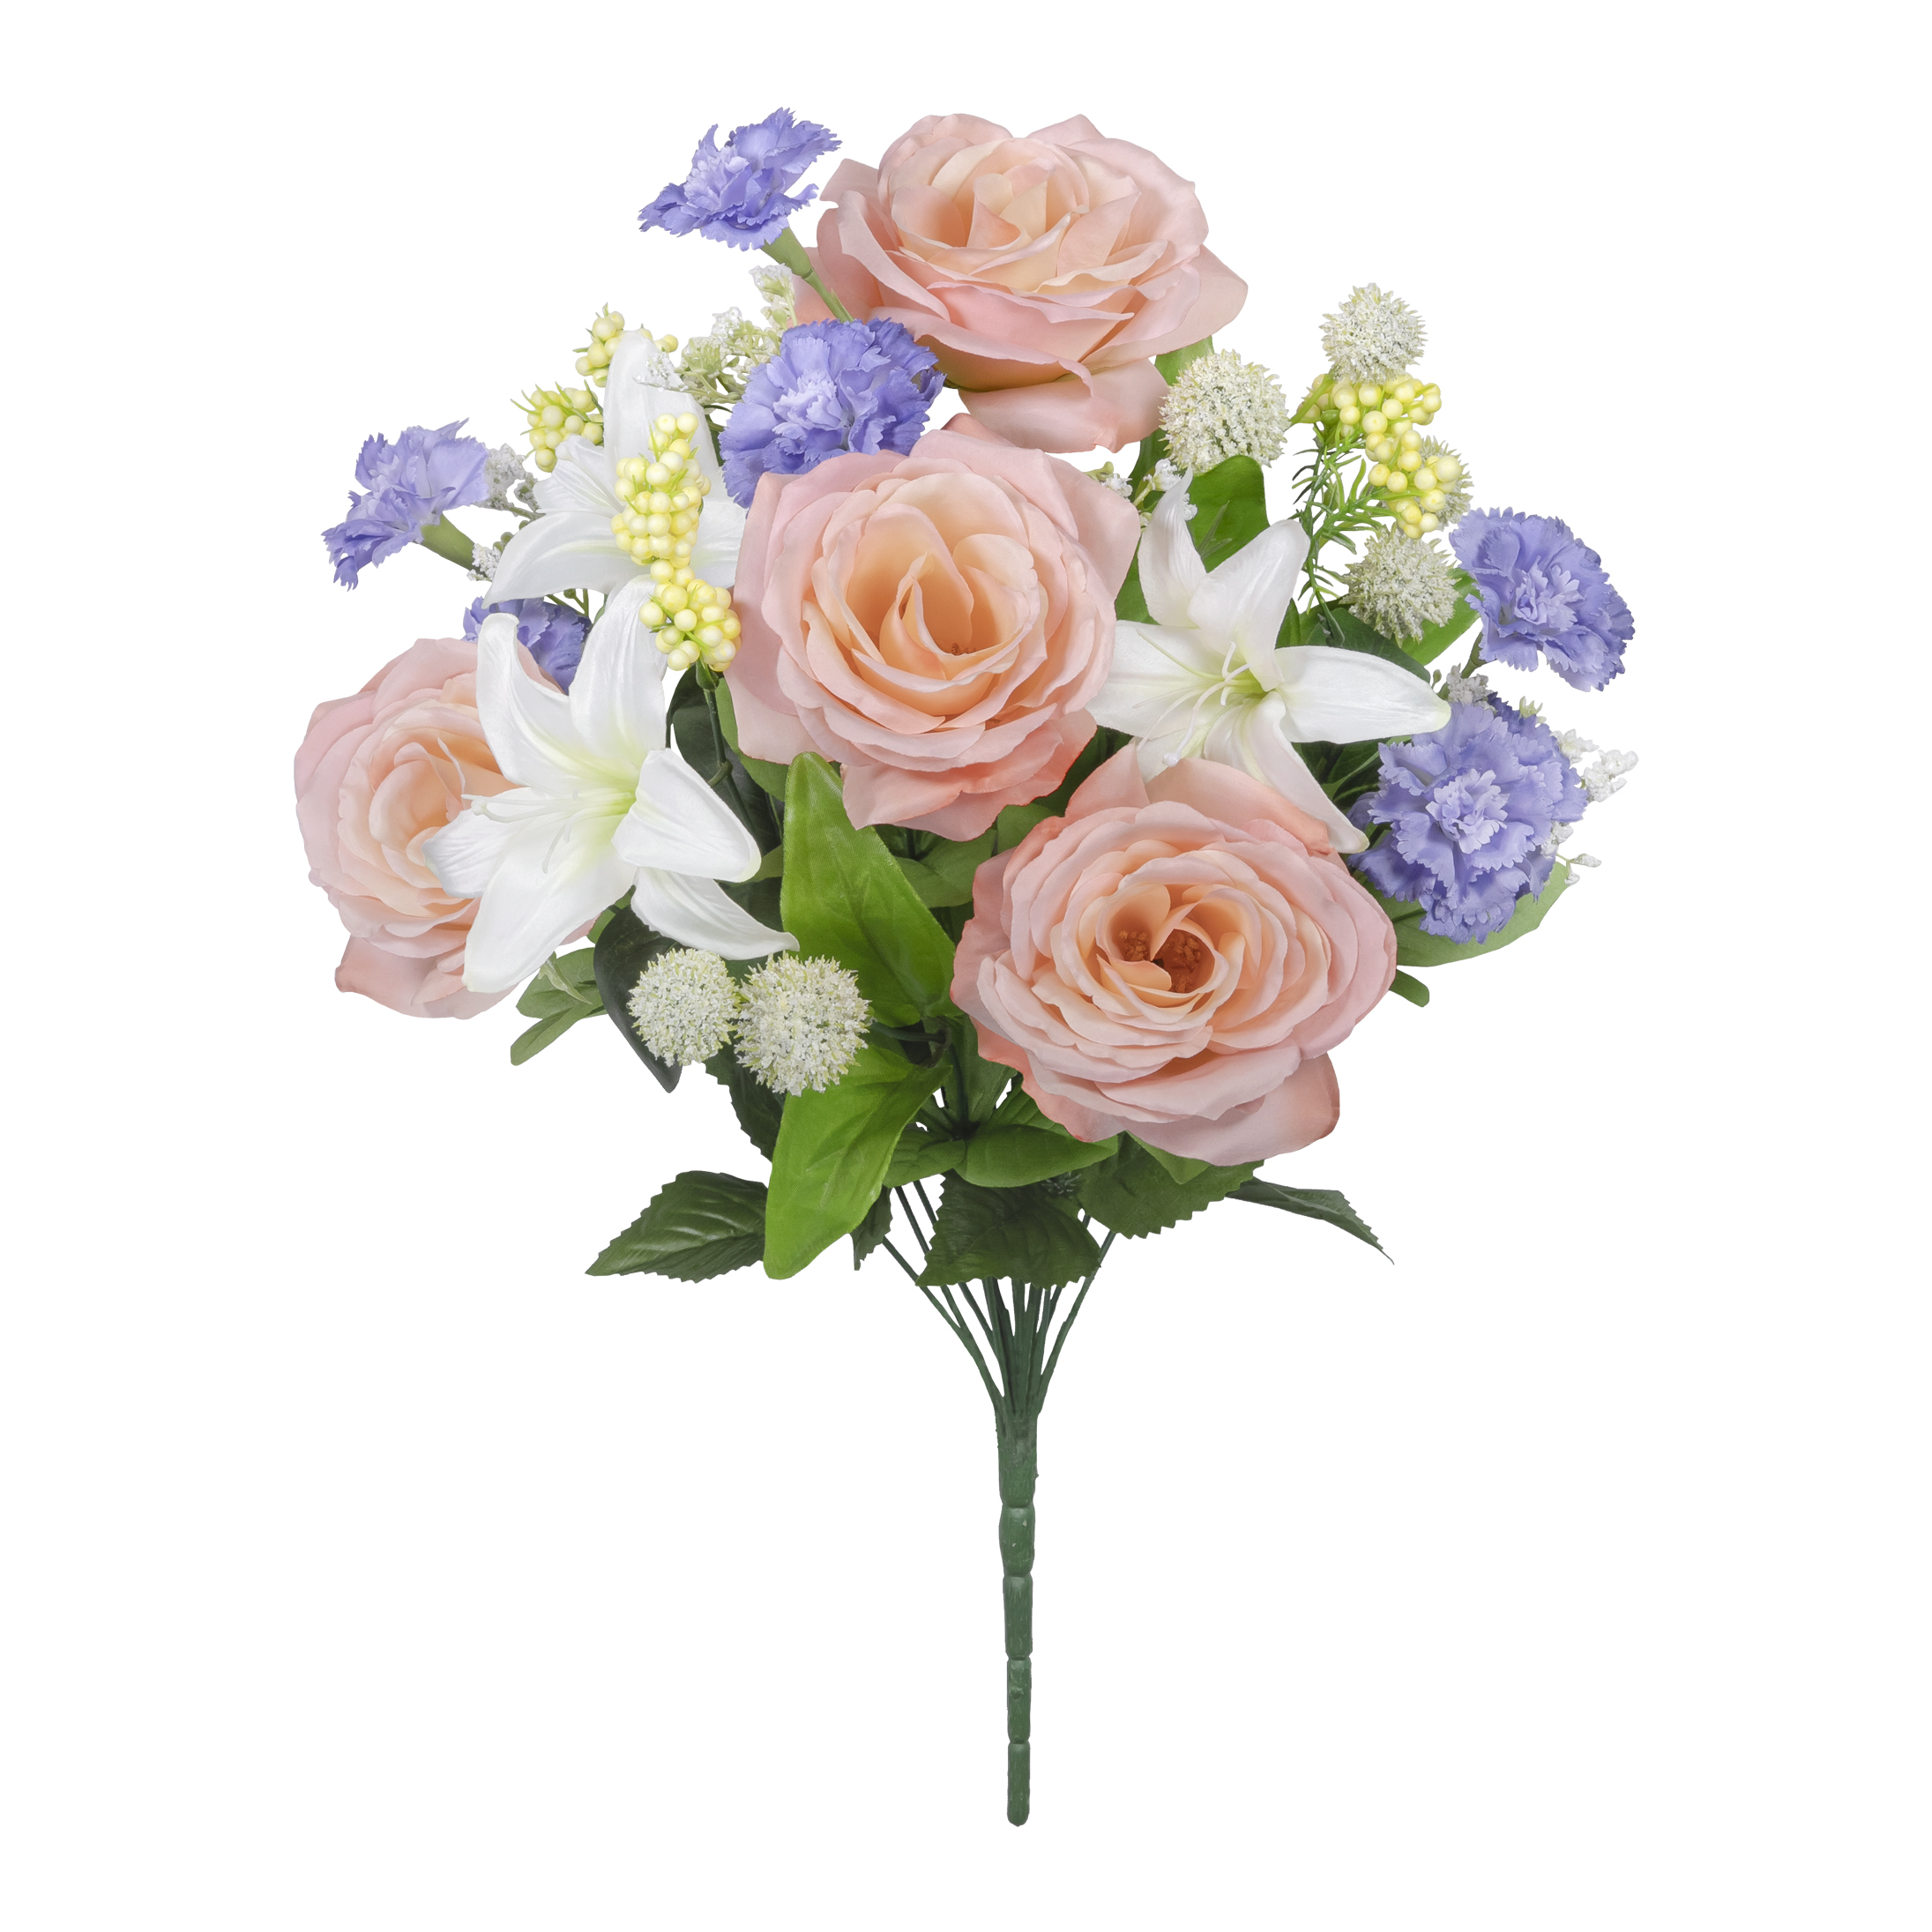 21.5-inch Artificial Silk Coral & Cream Rose & Lily Mixed Spring Bouquet, for Indoor Use, by Mainstays - image 1 of 5